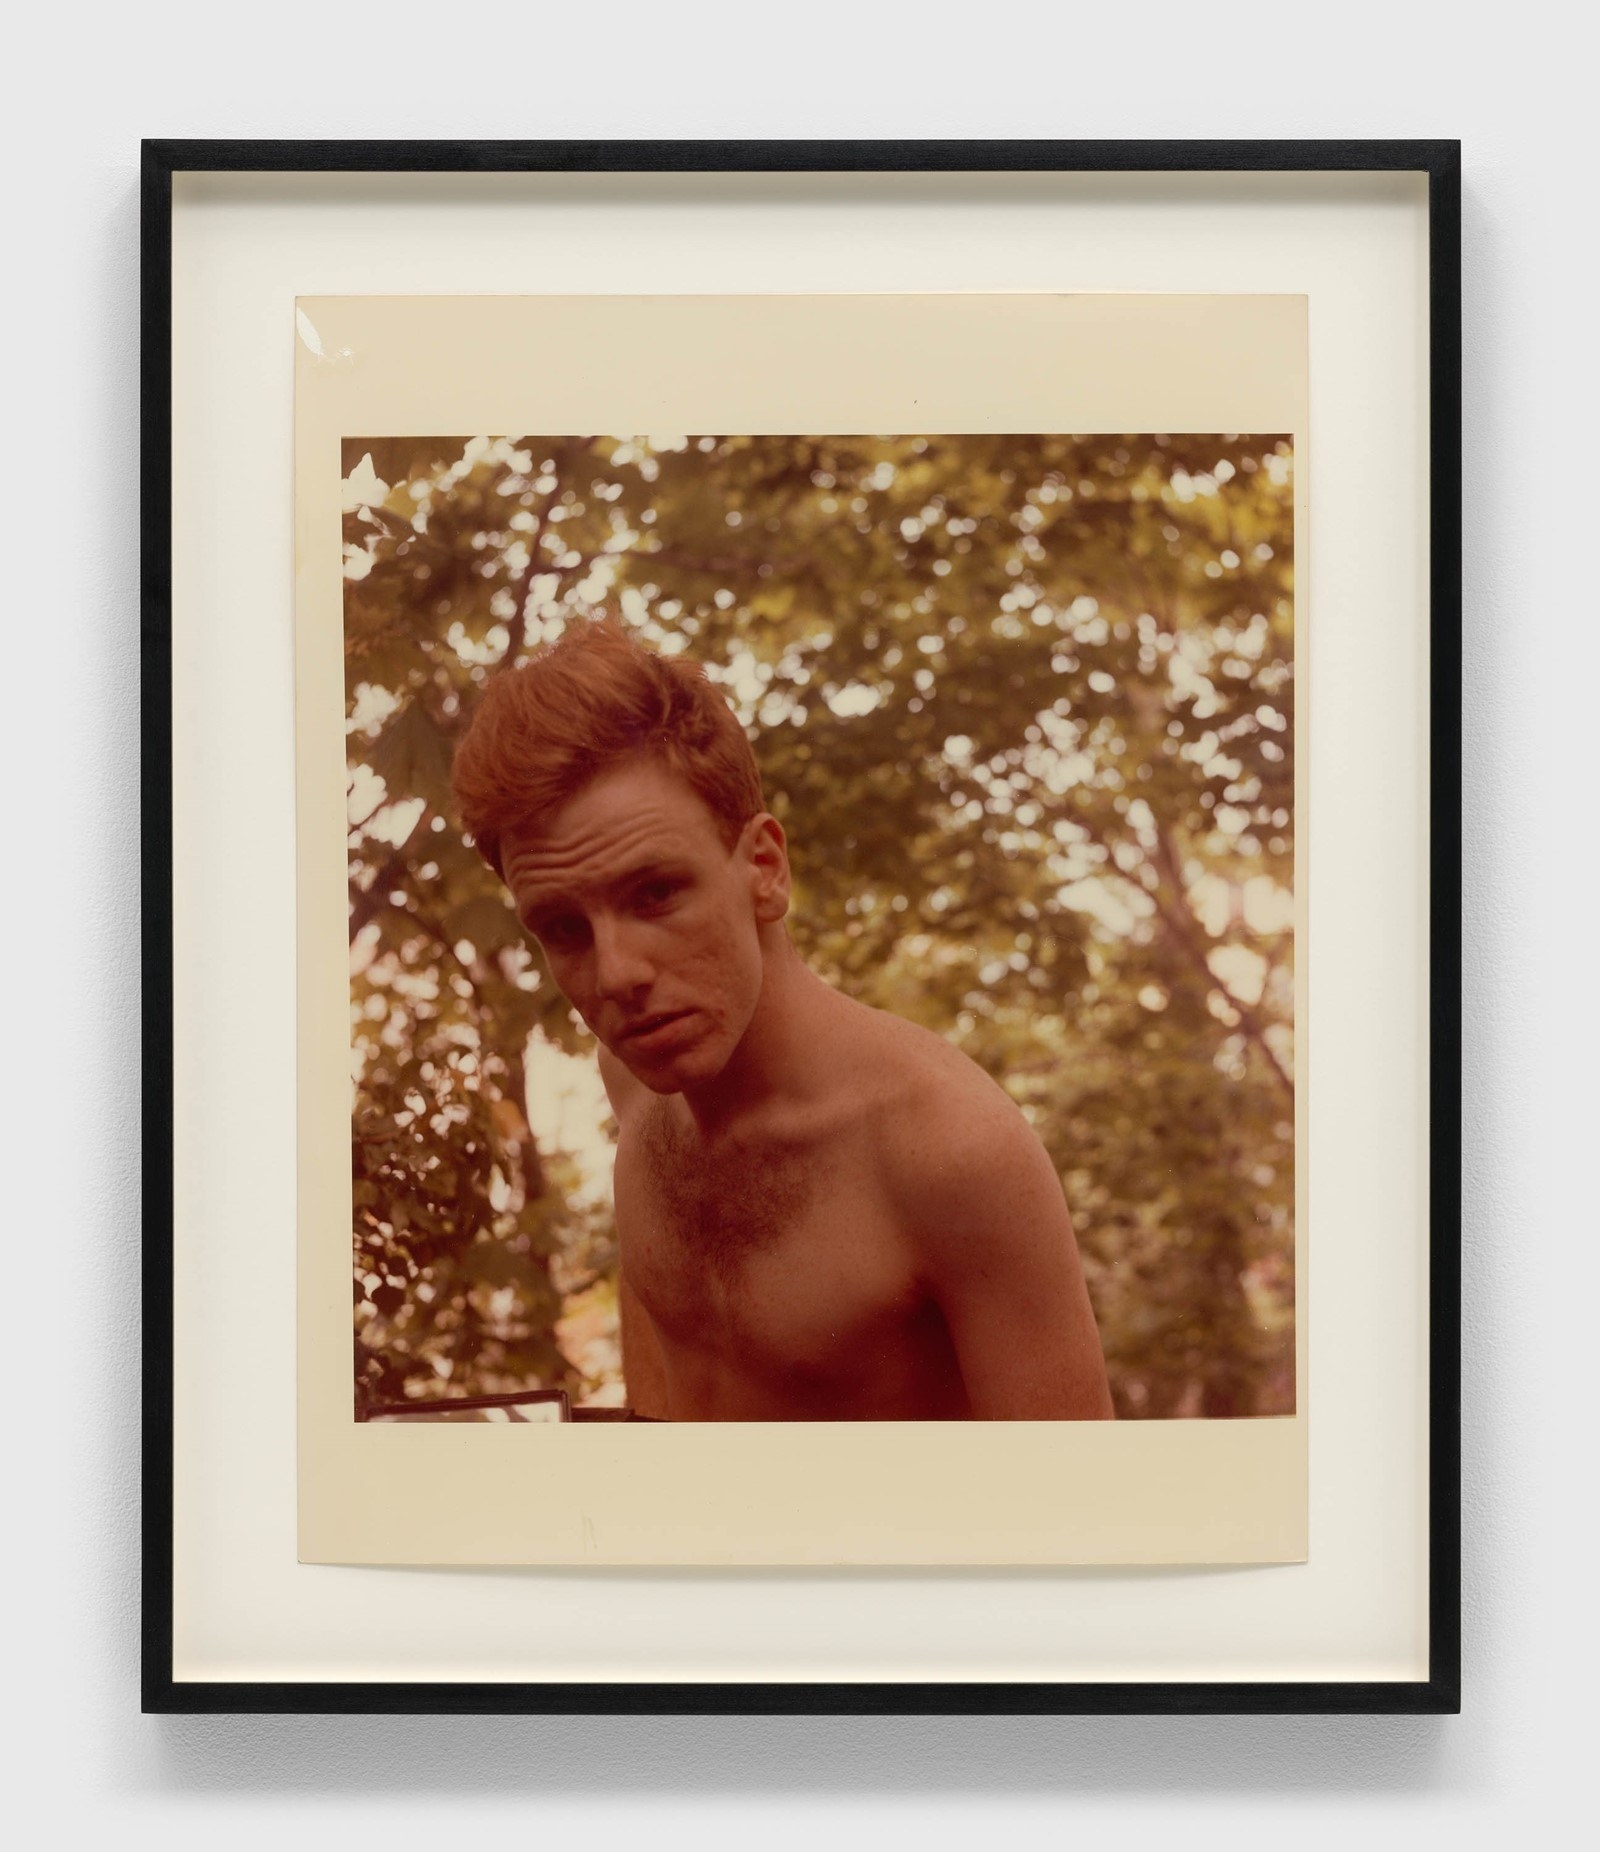 A young man looks at the camera in front of a tree in a framed photo